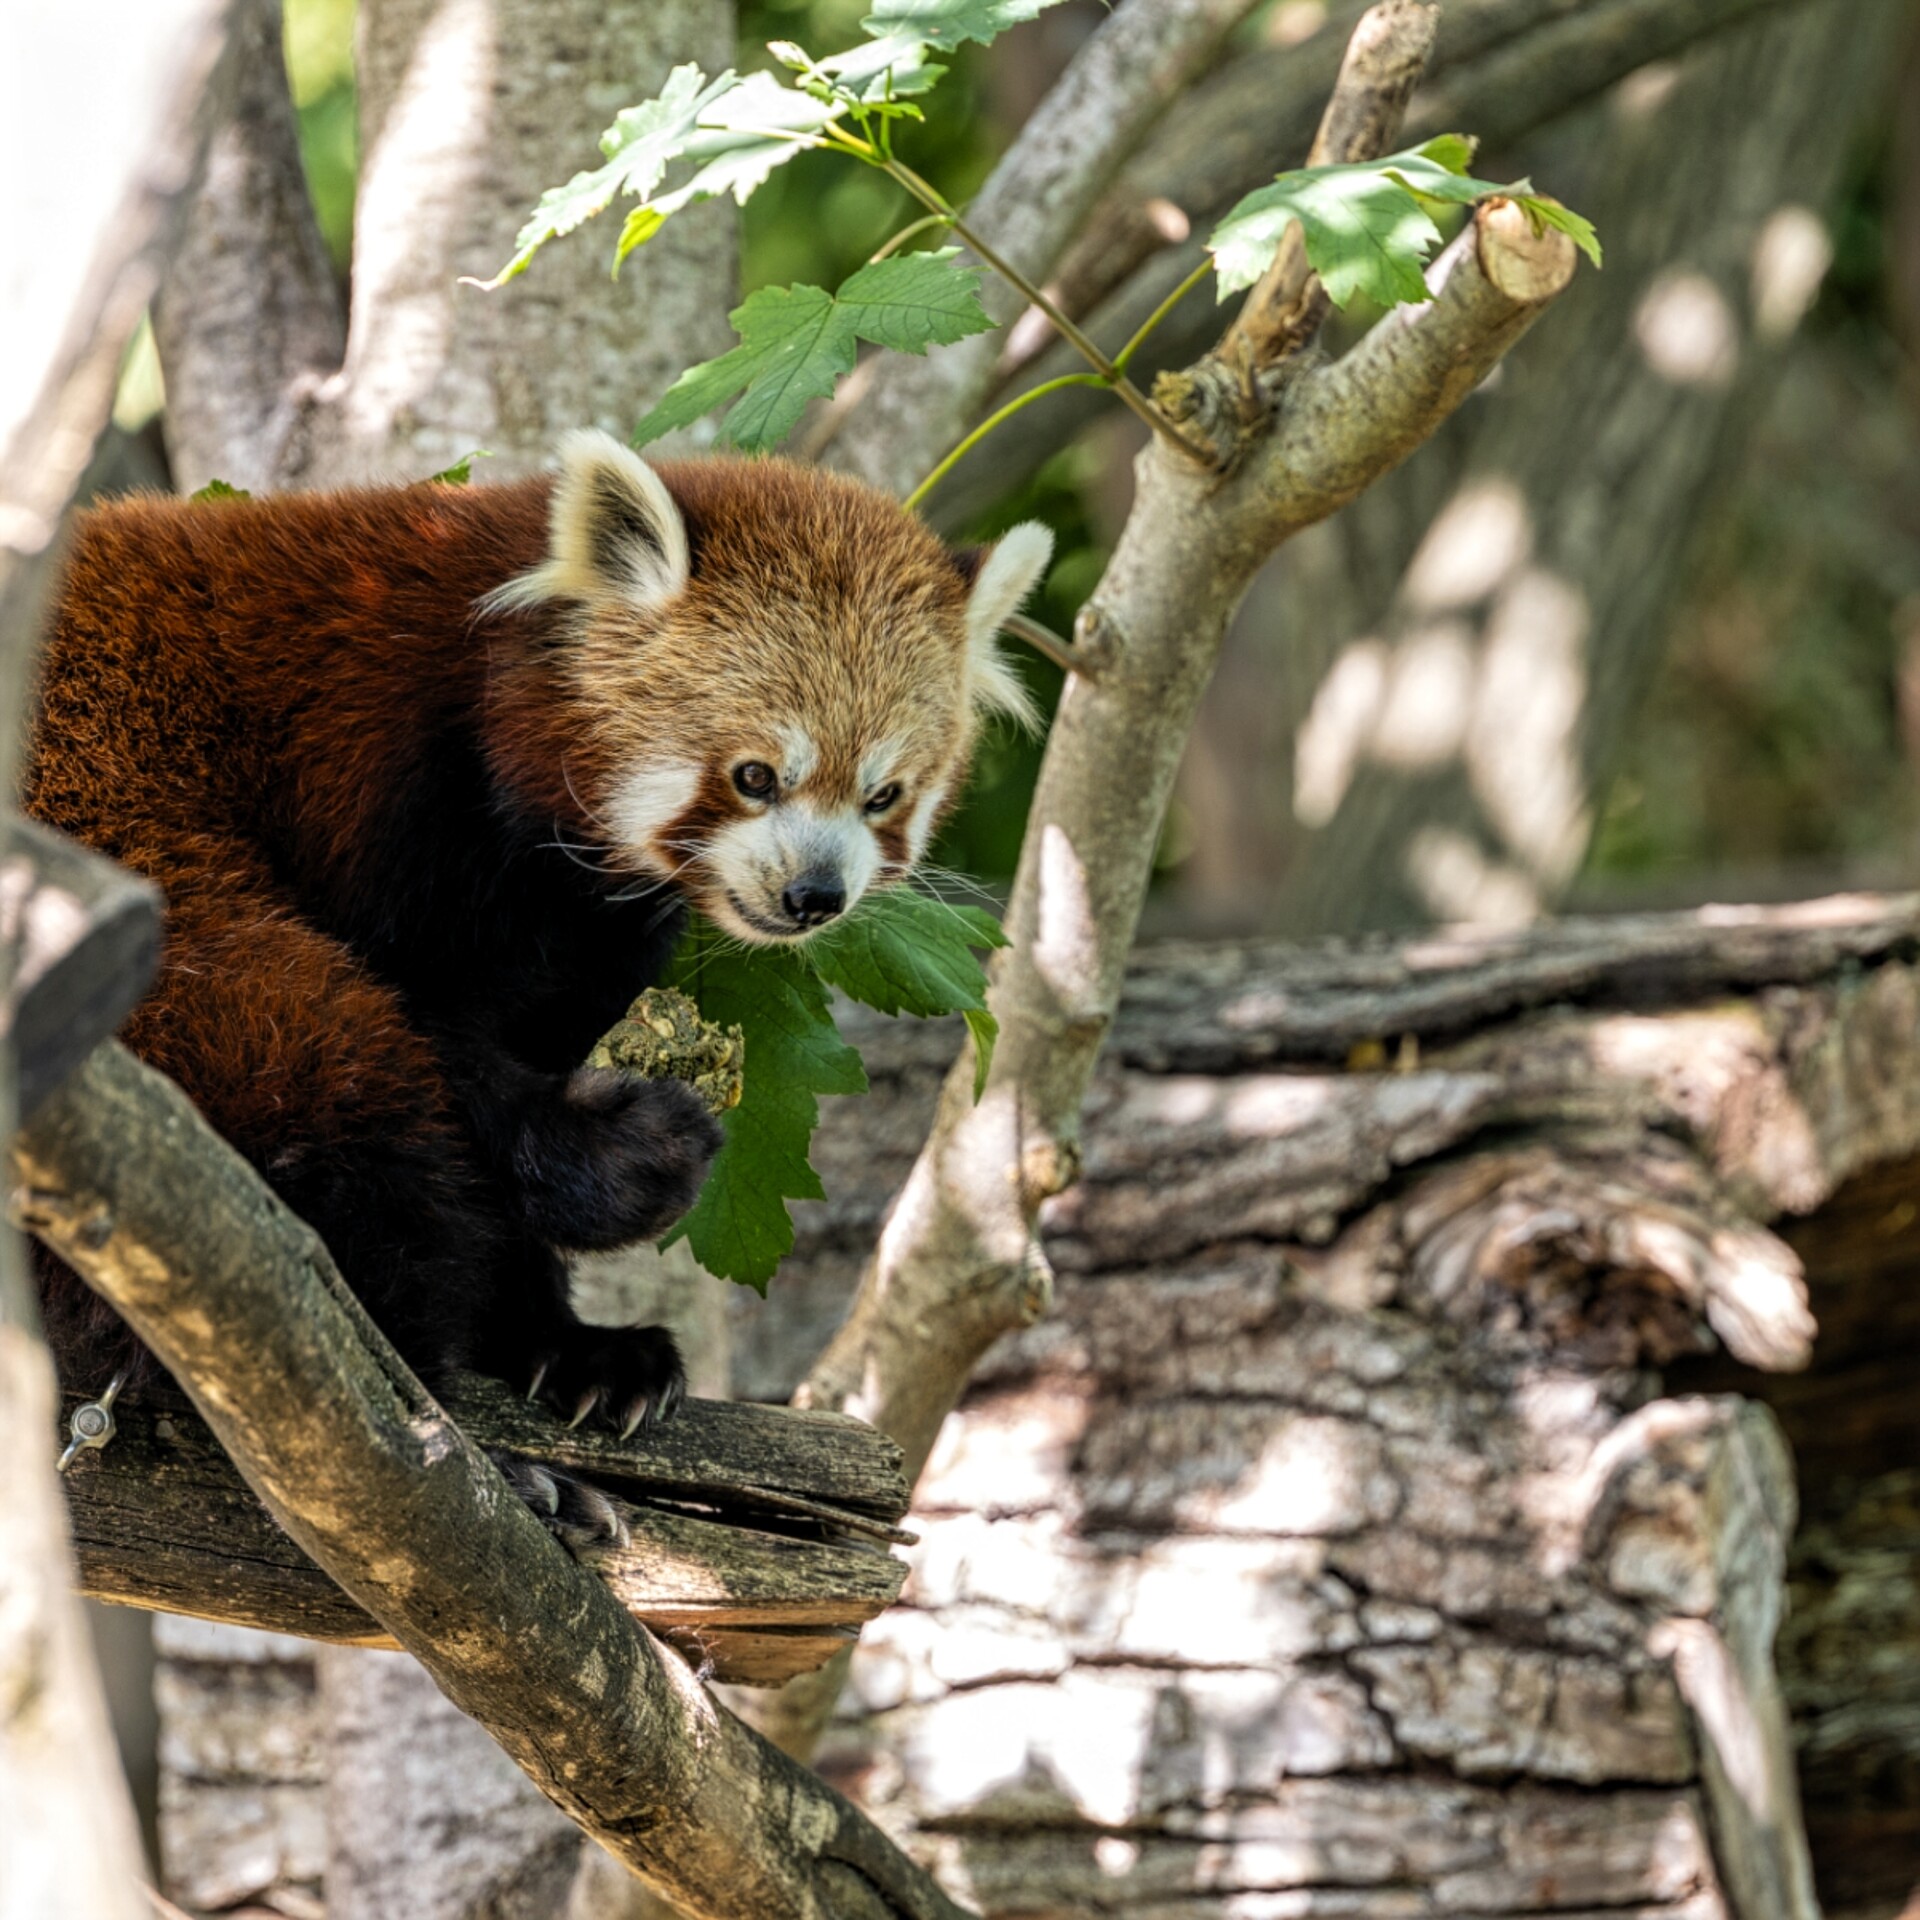 A red panda is sitting on a branch. With his right paw he holds a panda cookie. It looks like he is smiling mischievously.